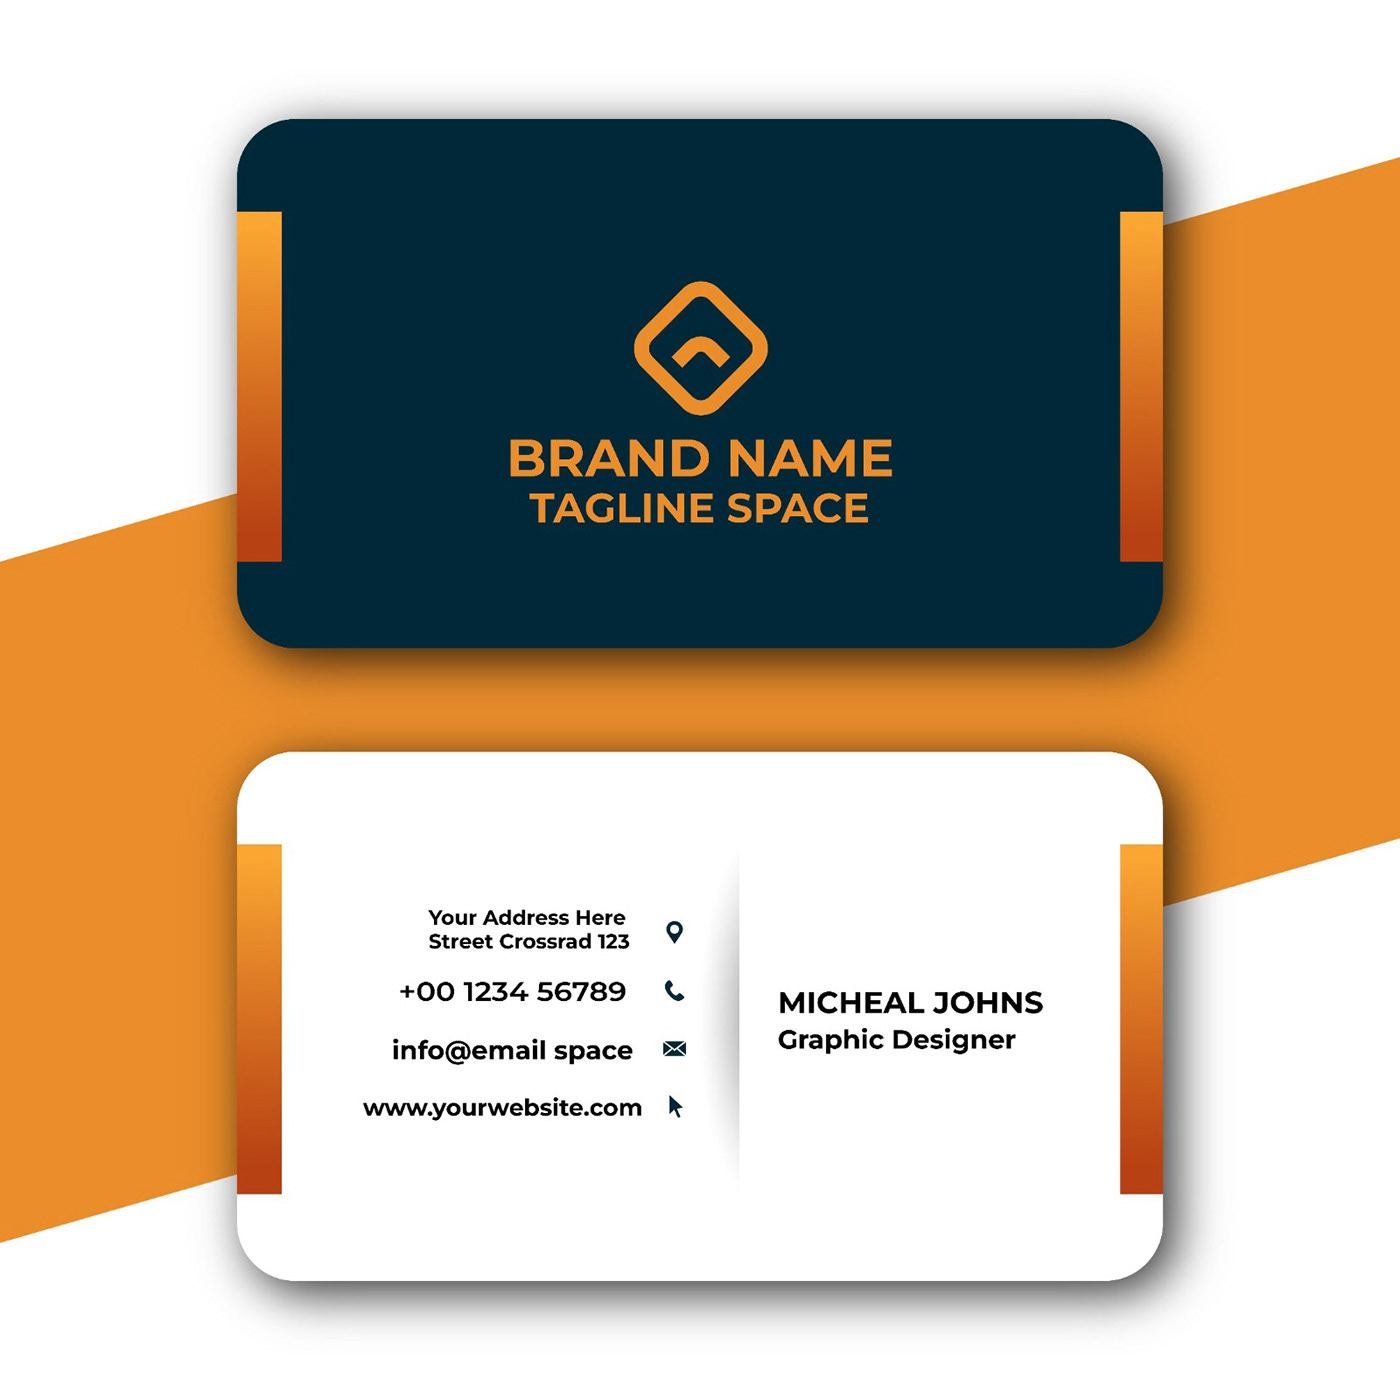 text adobe illustrator vector business card flyer simple banner design typing Printing brochure